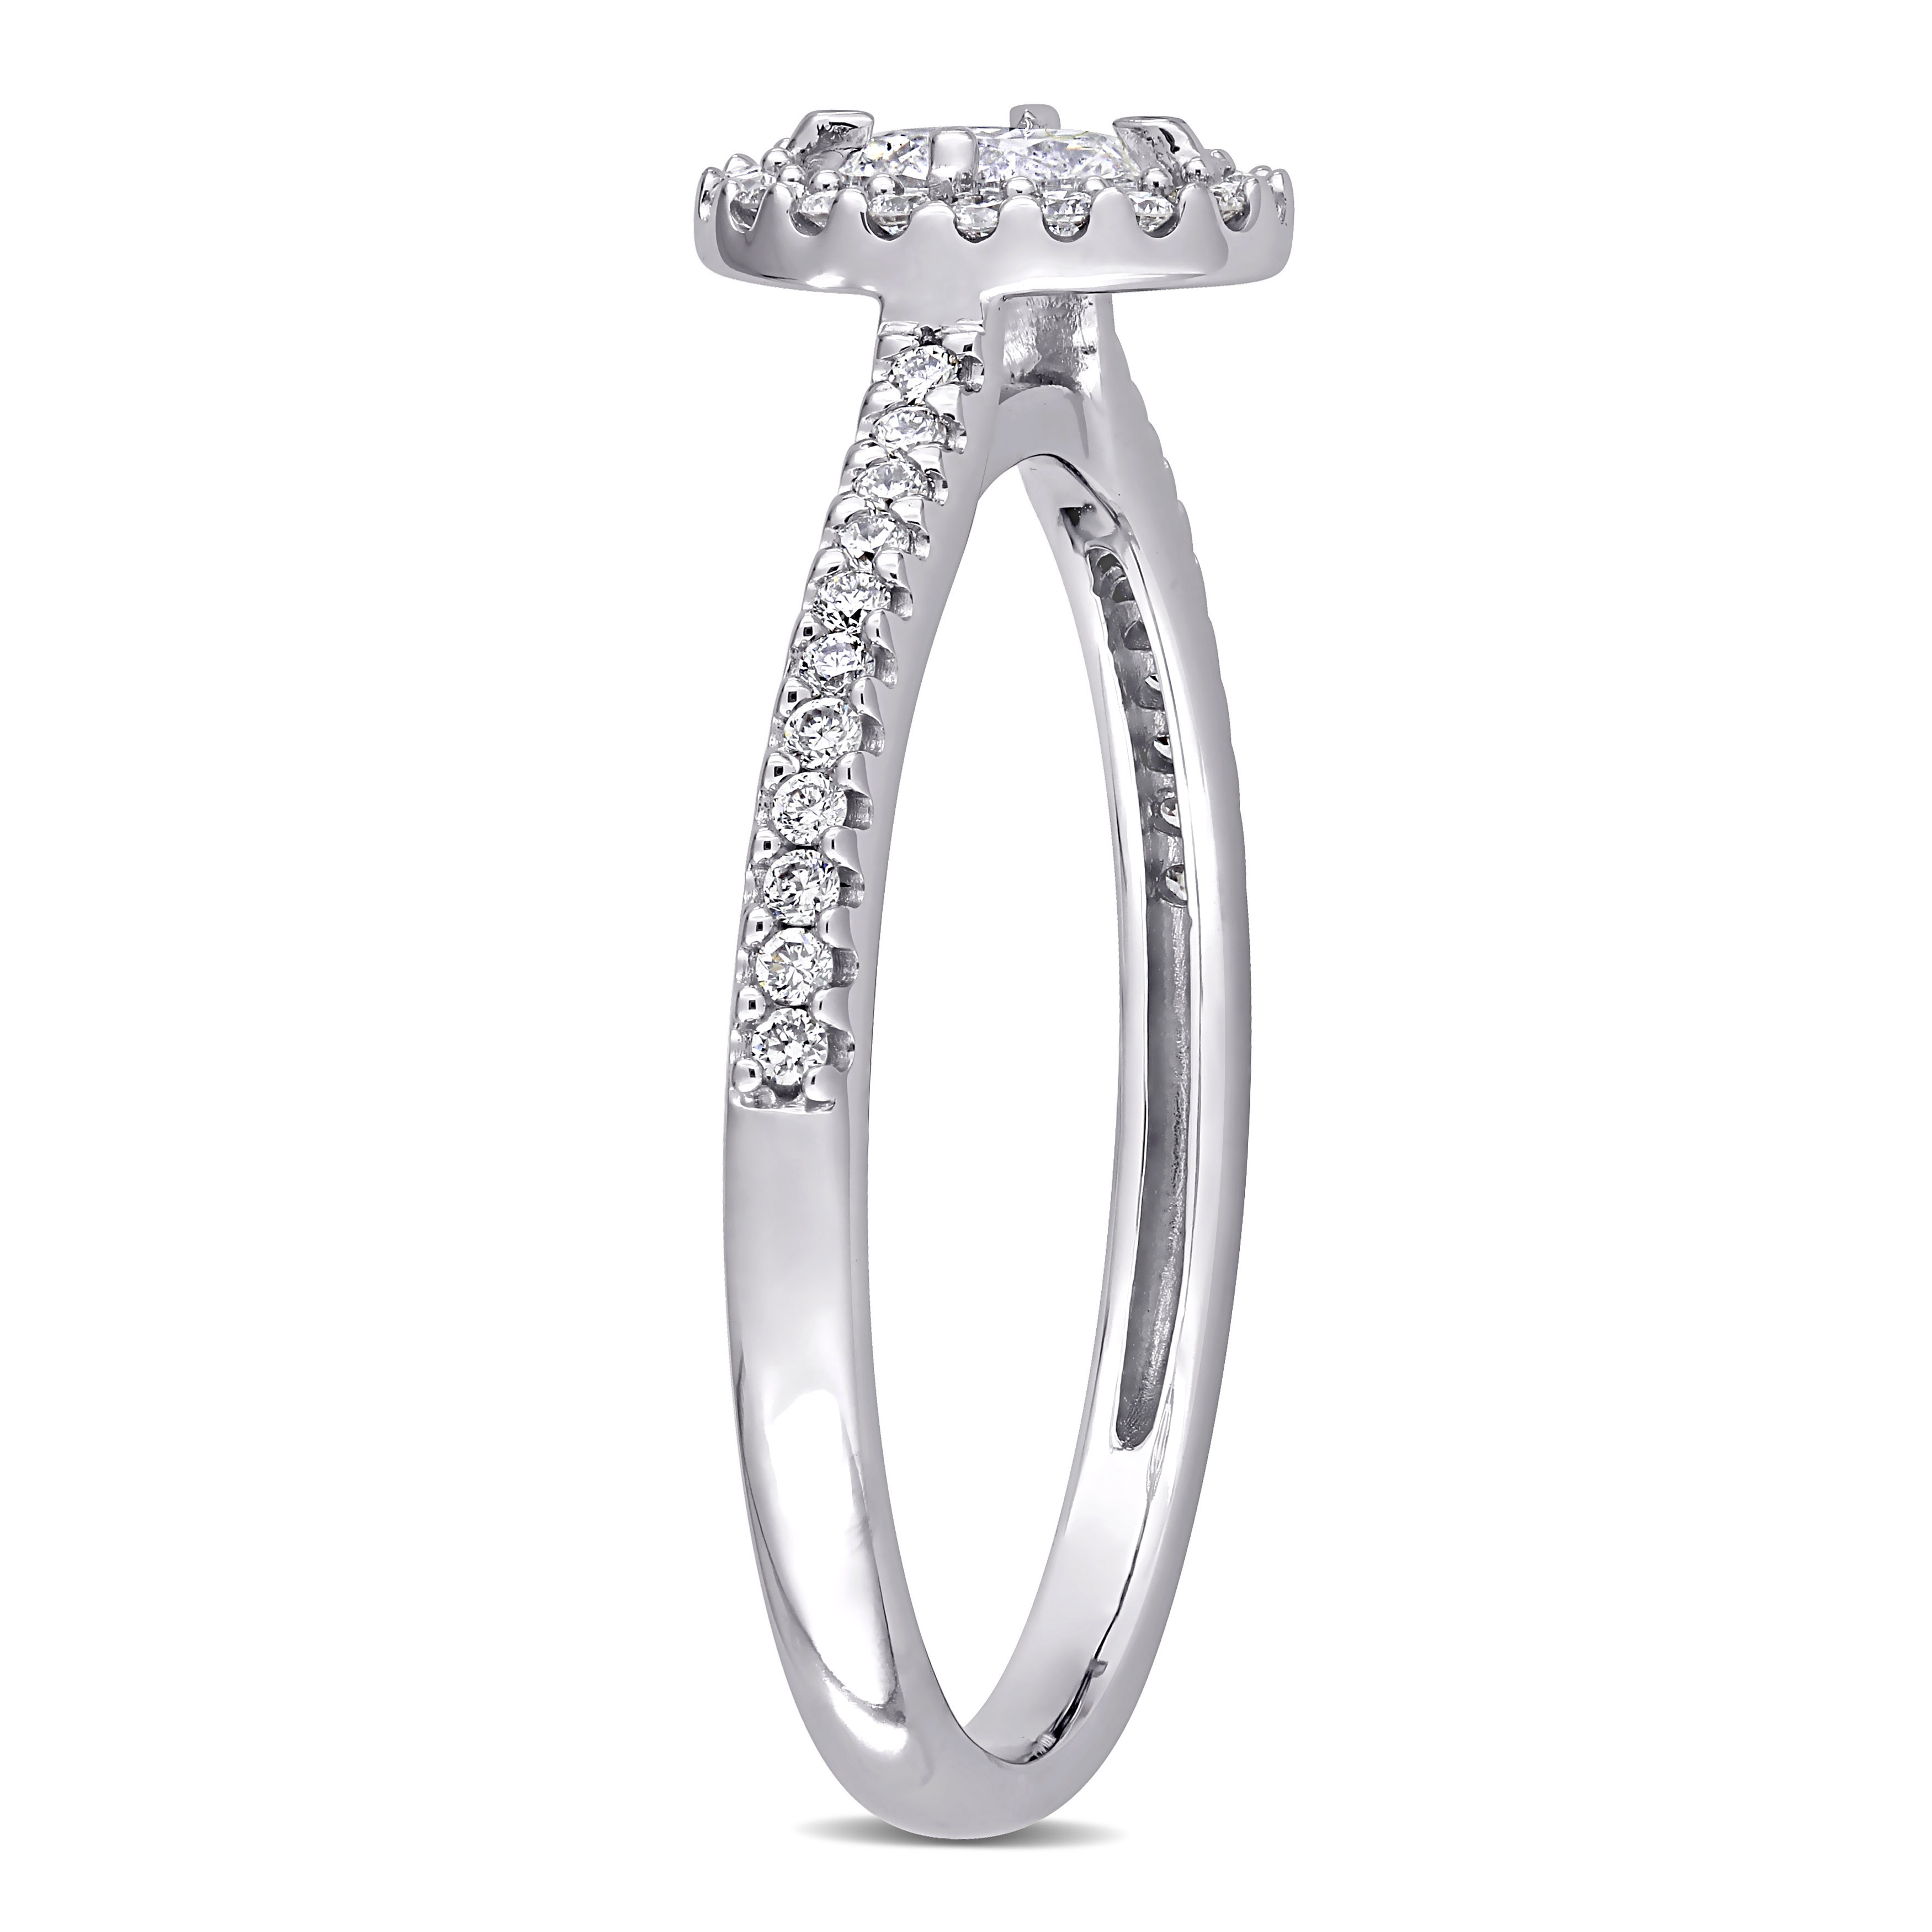 1/2 CT TW Oval-Cut Diamond Floating Halo Engagement Ring in 14k White Gold